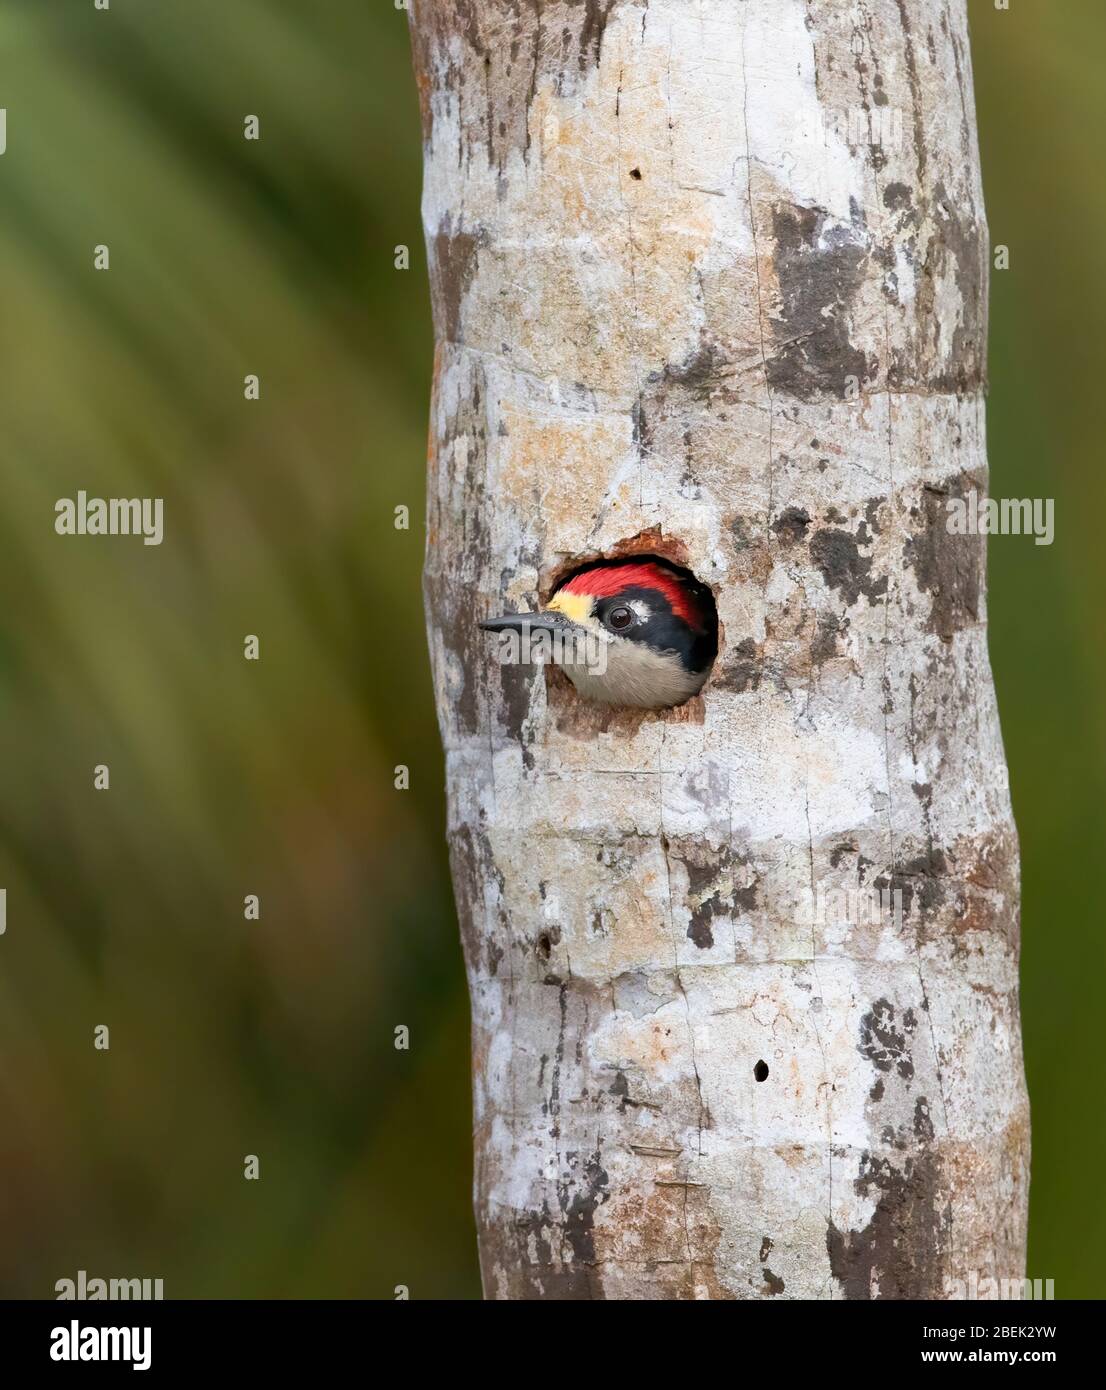 Black-cheeked Woodpecker, (Melanerpes pucherani) nesting in a tree in the jungles of Costa Rica. Stock Photo